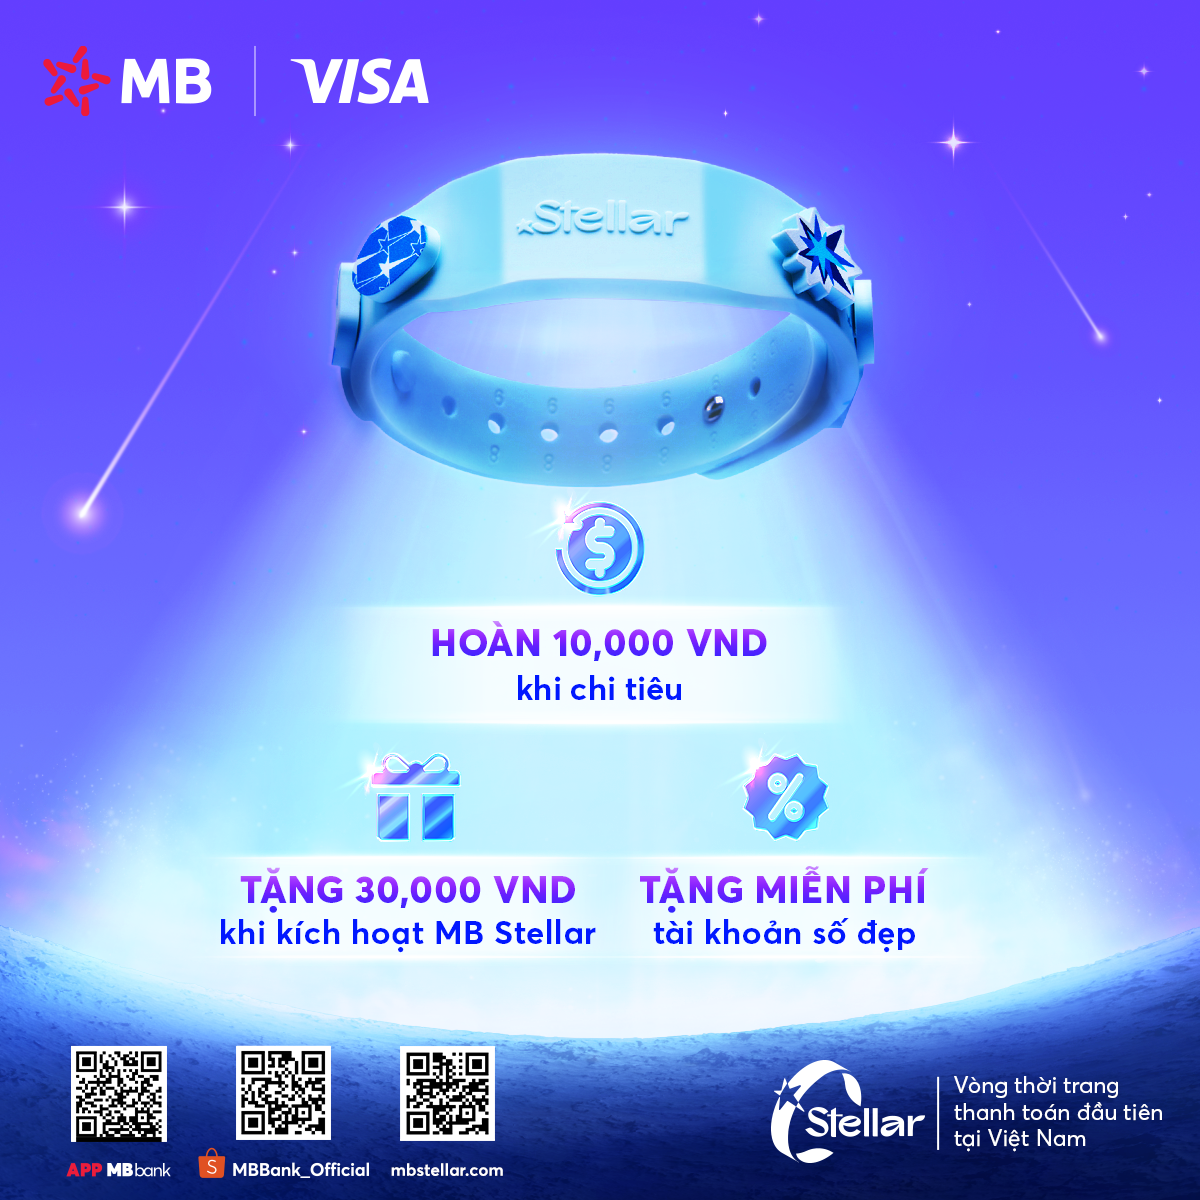 stellar-mb-vong-thanh-toan-900x900-1702365199.png